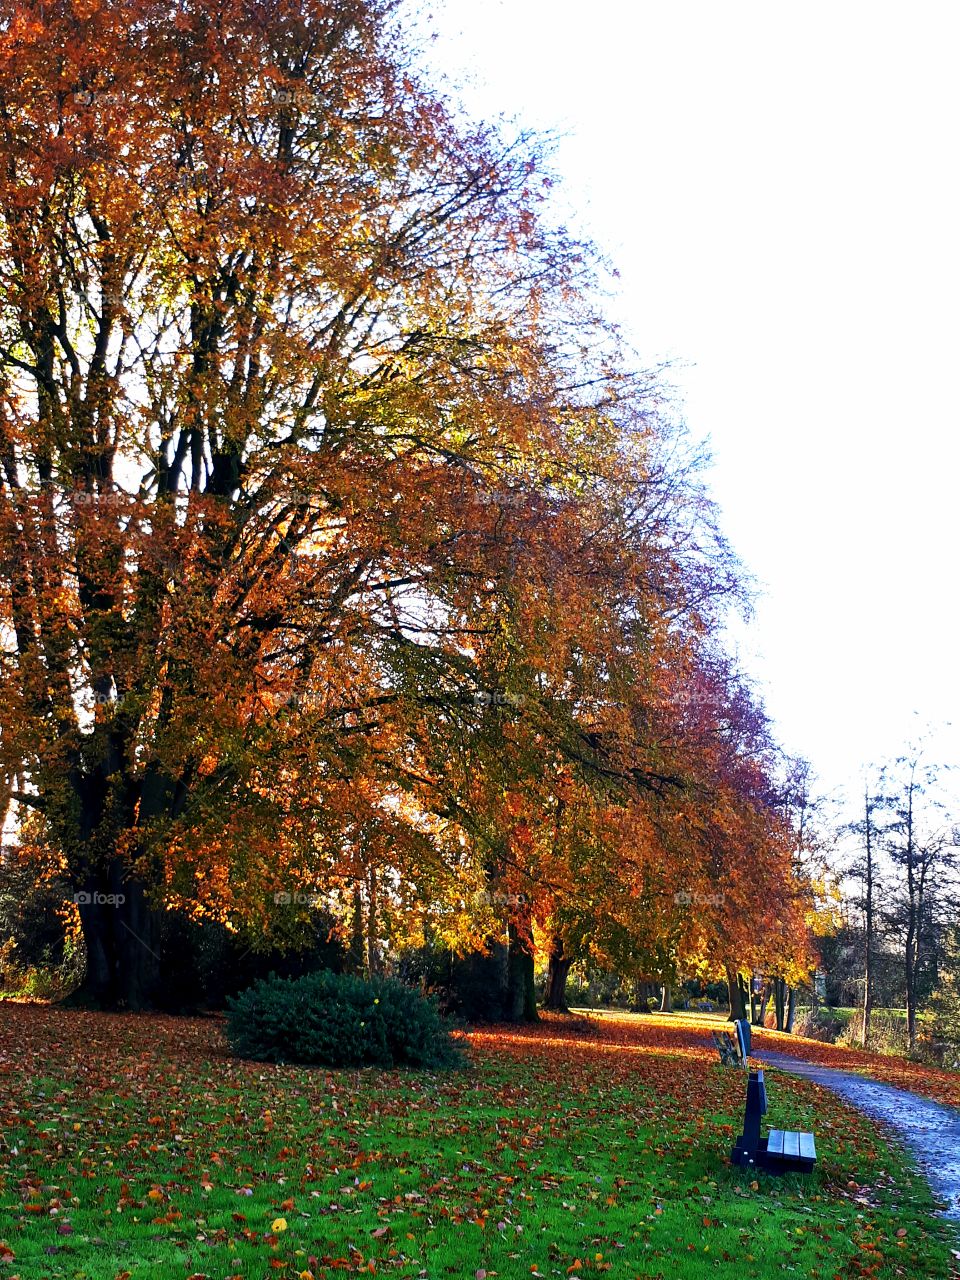 walking in the park, beautiful season. gold and yellow leaves. stunning